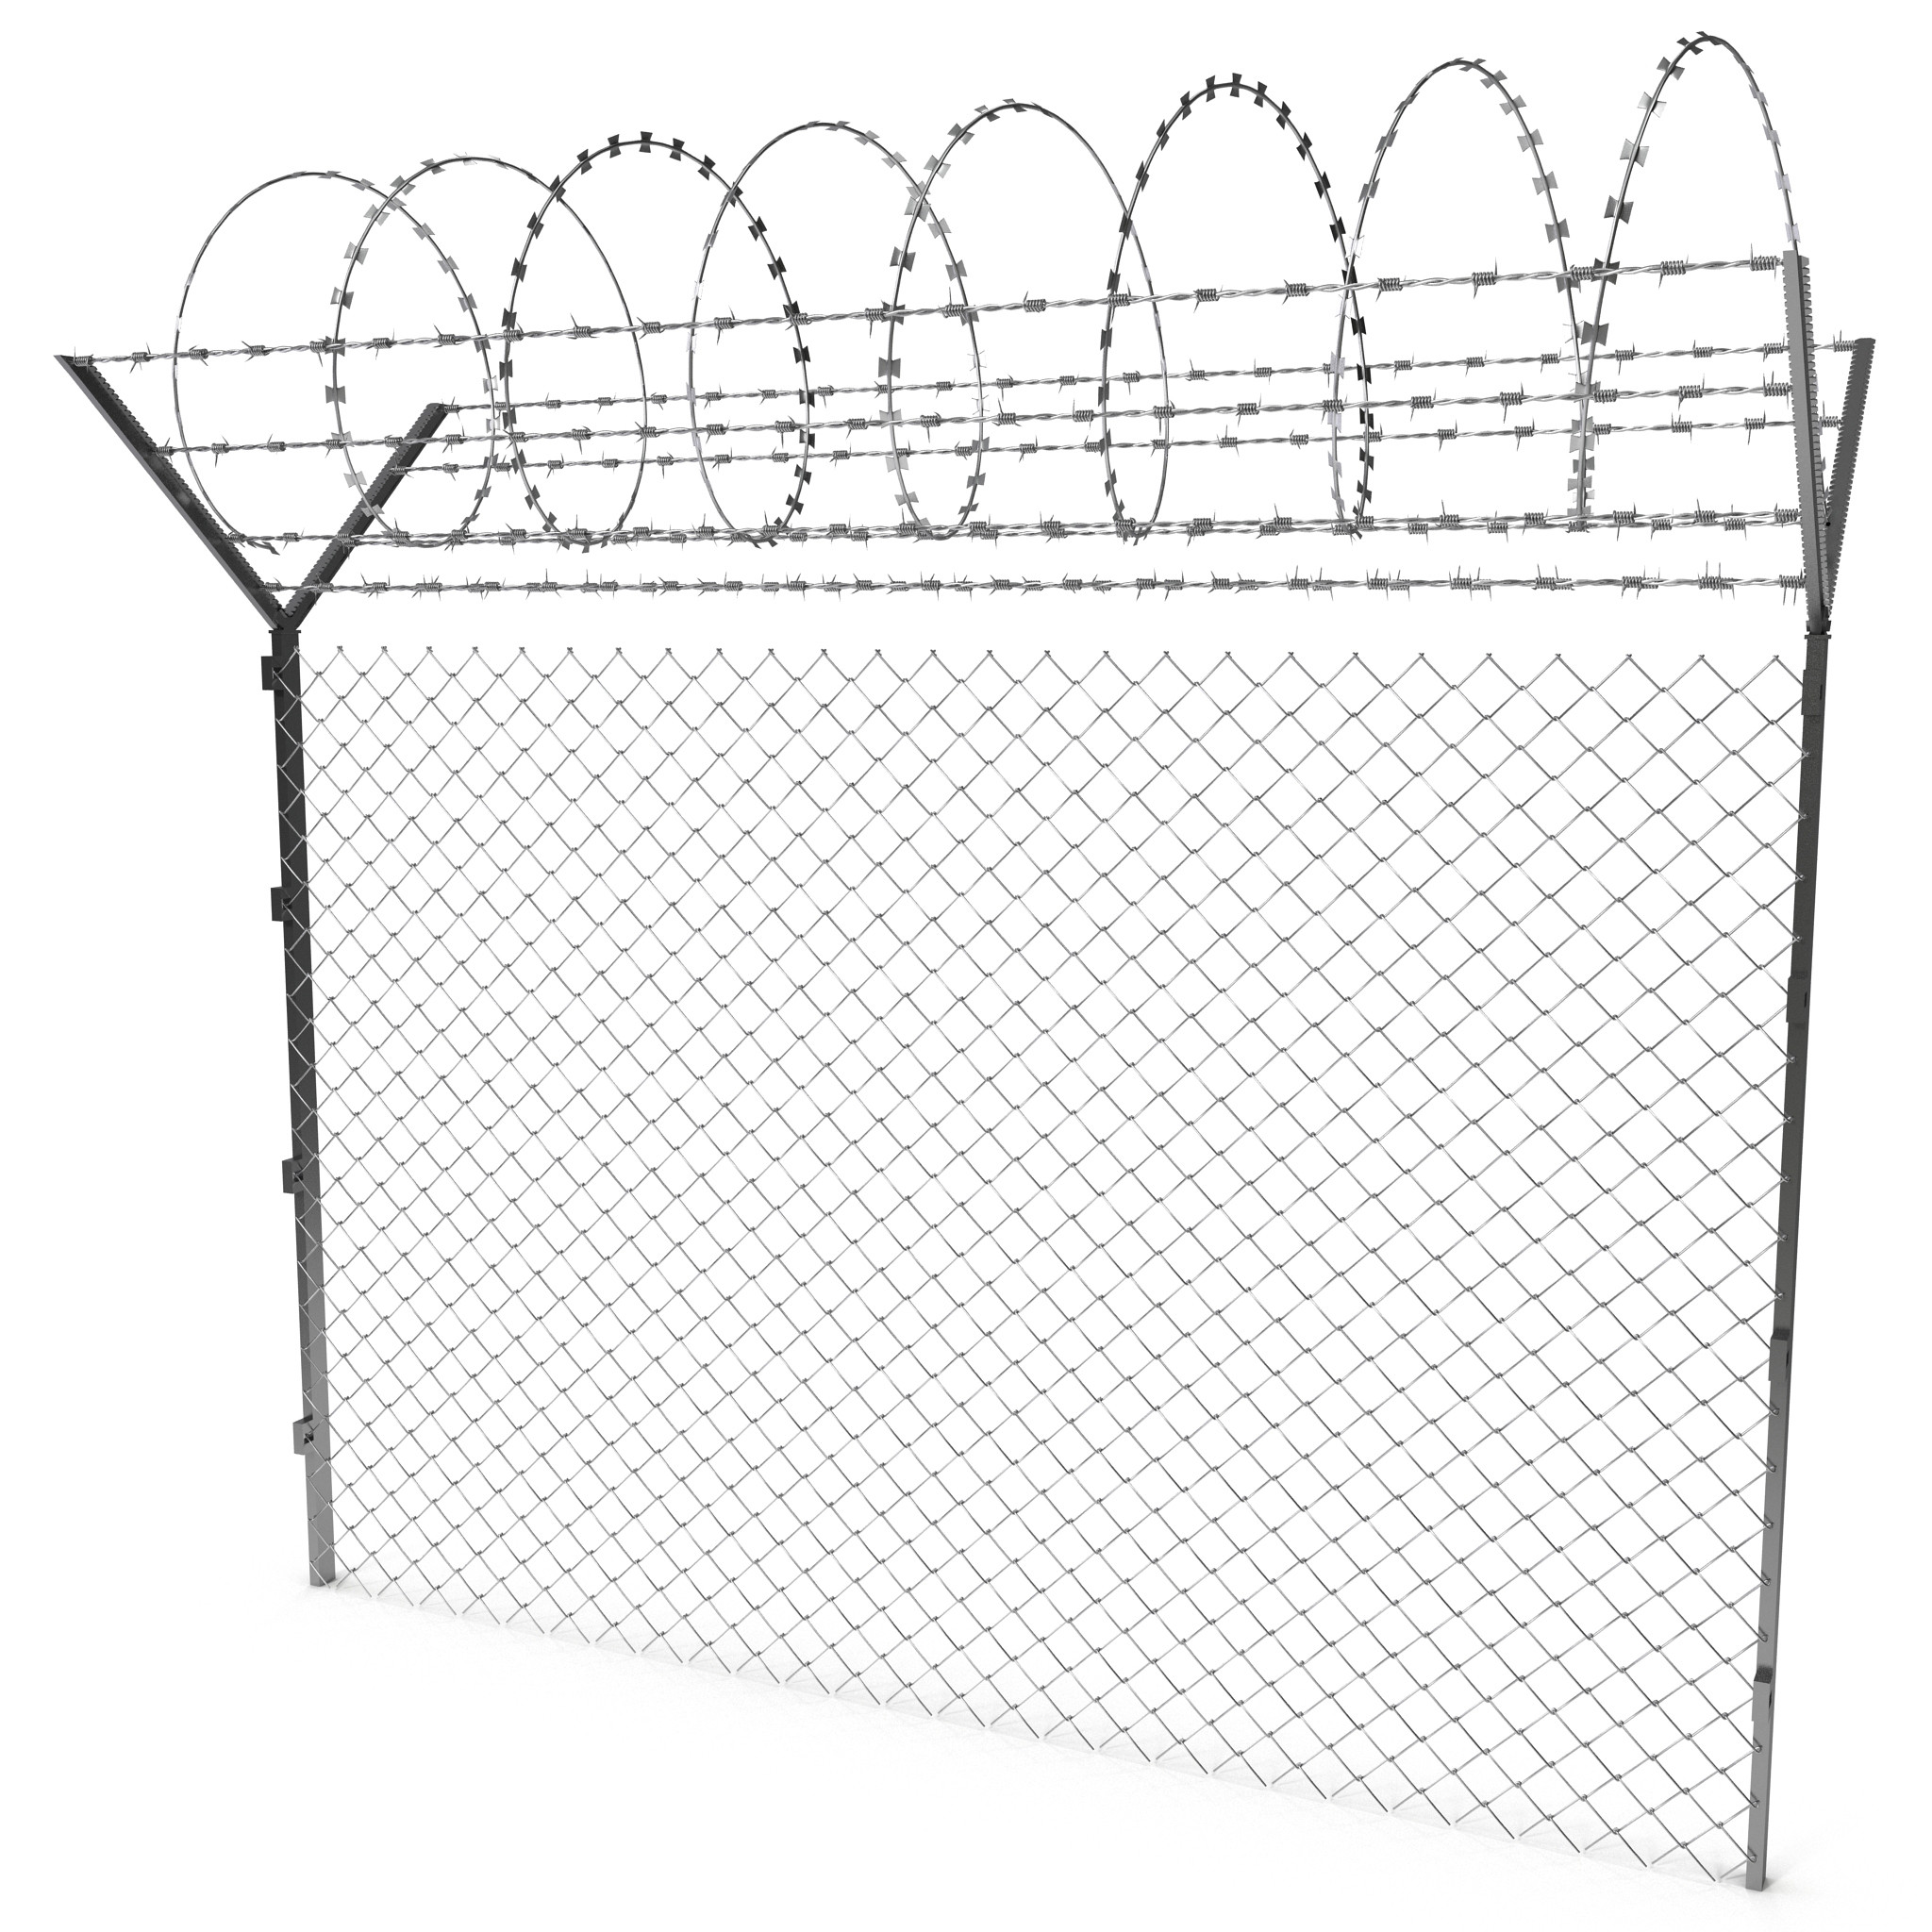 How To Draw Barbed Wire In Autocad